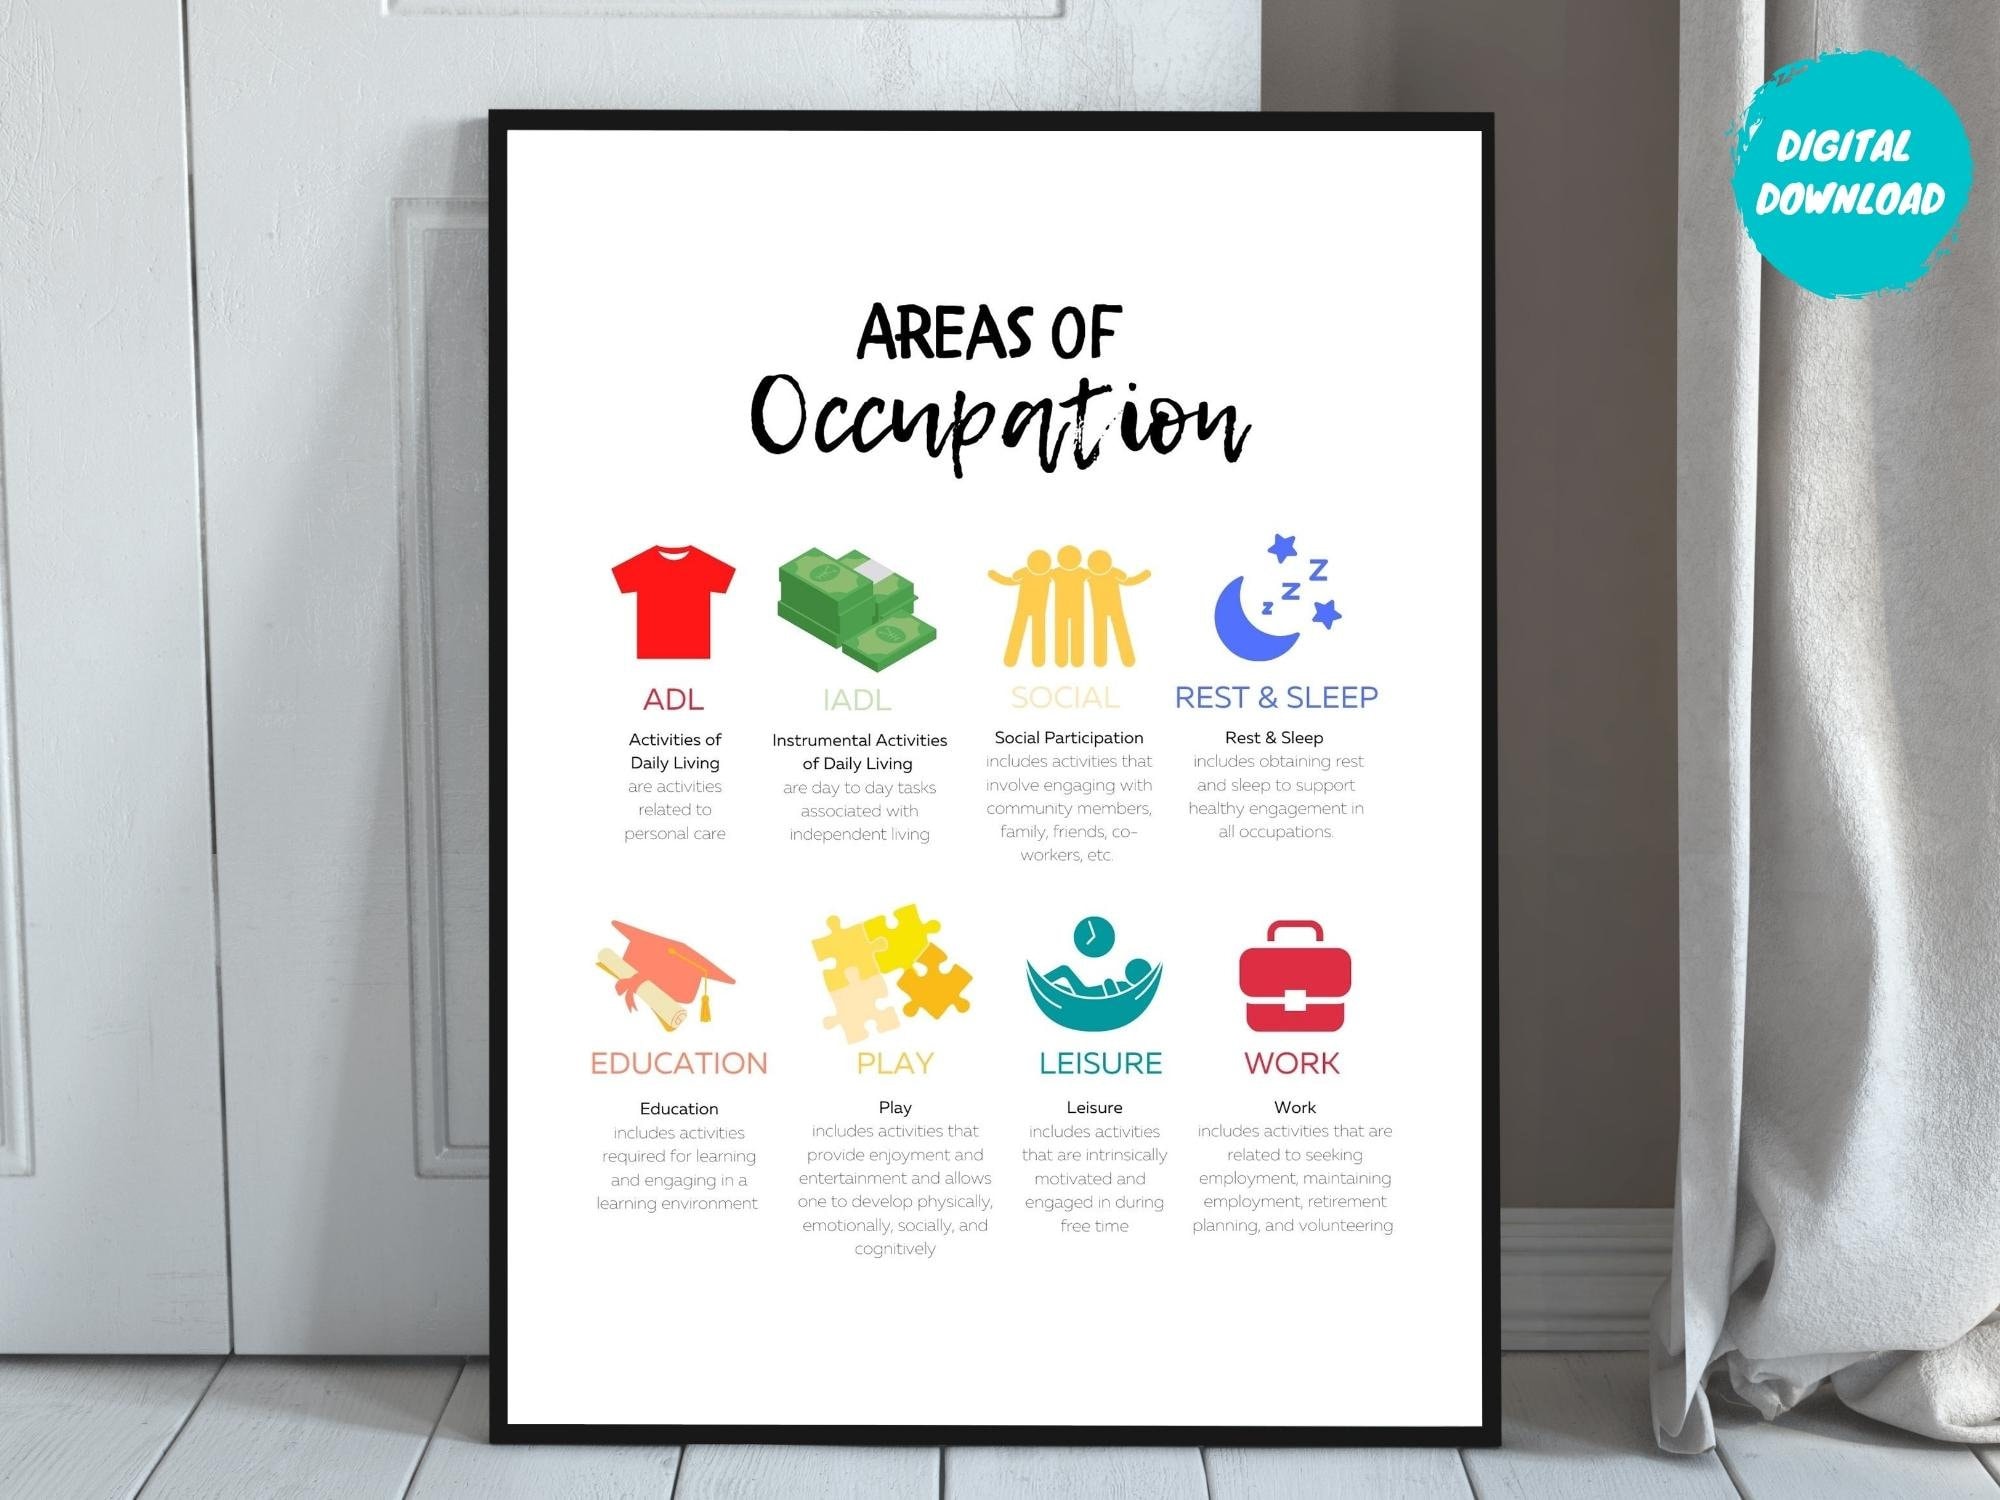 Funny Awesome Hand Sewer Job Occupation Poster for Sale by